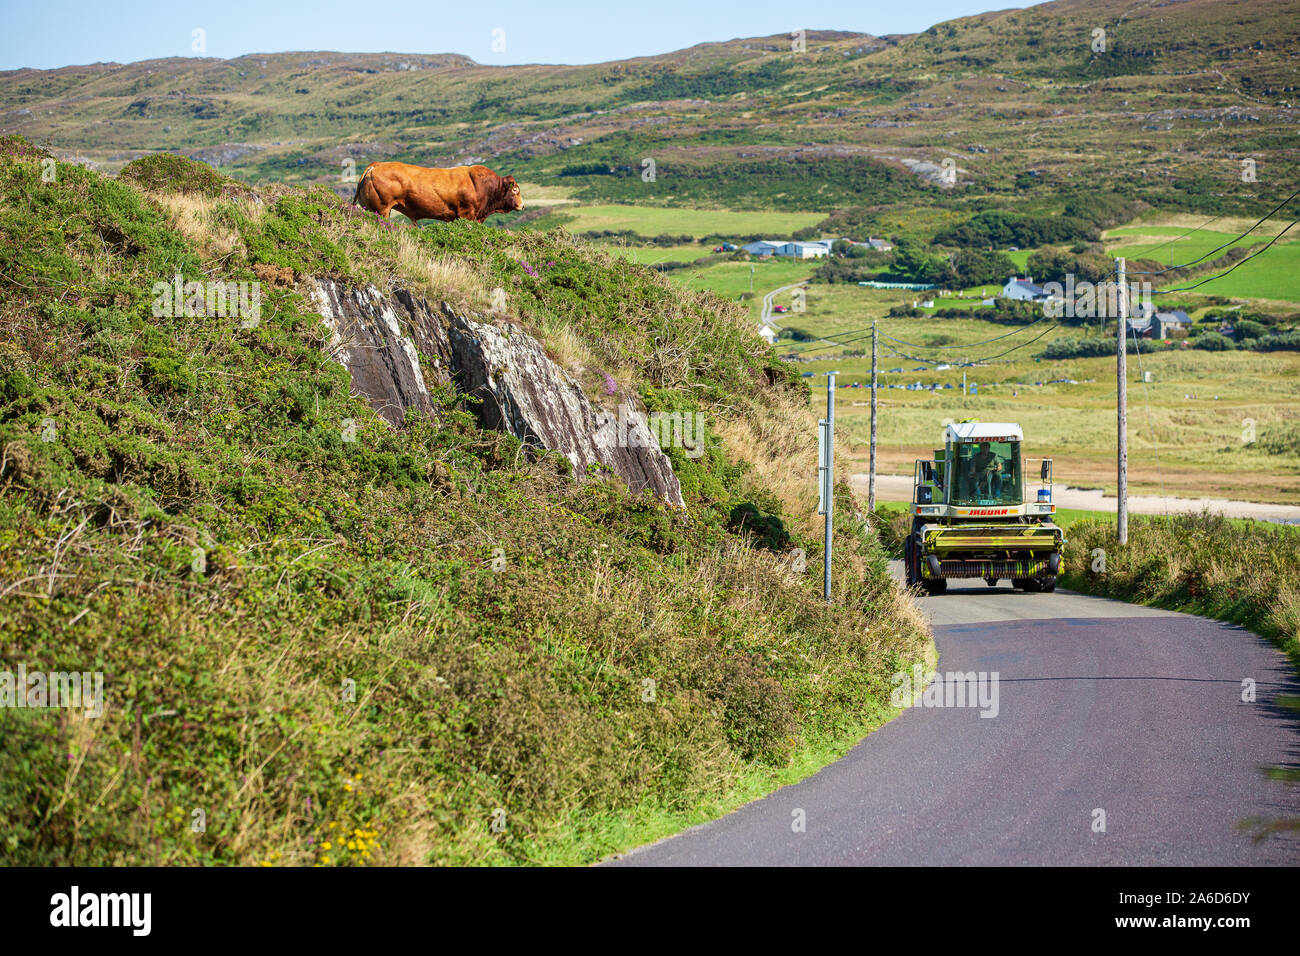 Pasturing bull at the edge of a cliff above the public road looking at the passing harvester. Ireland, West Cork Stock Photo